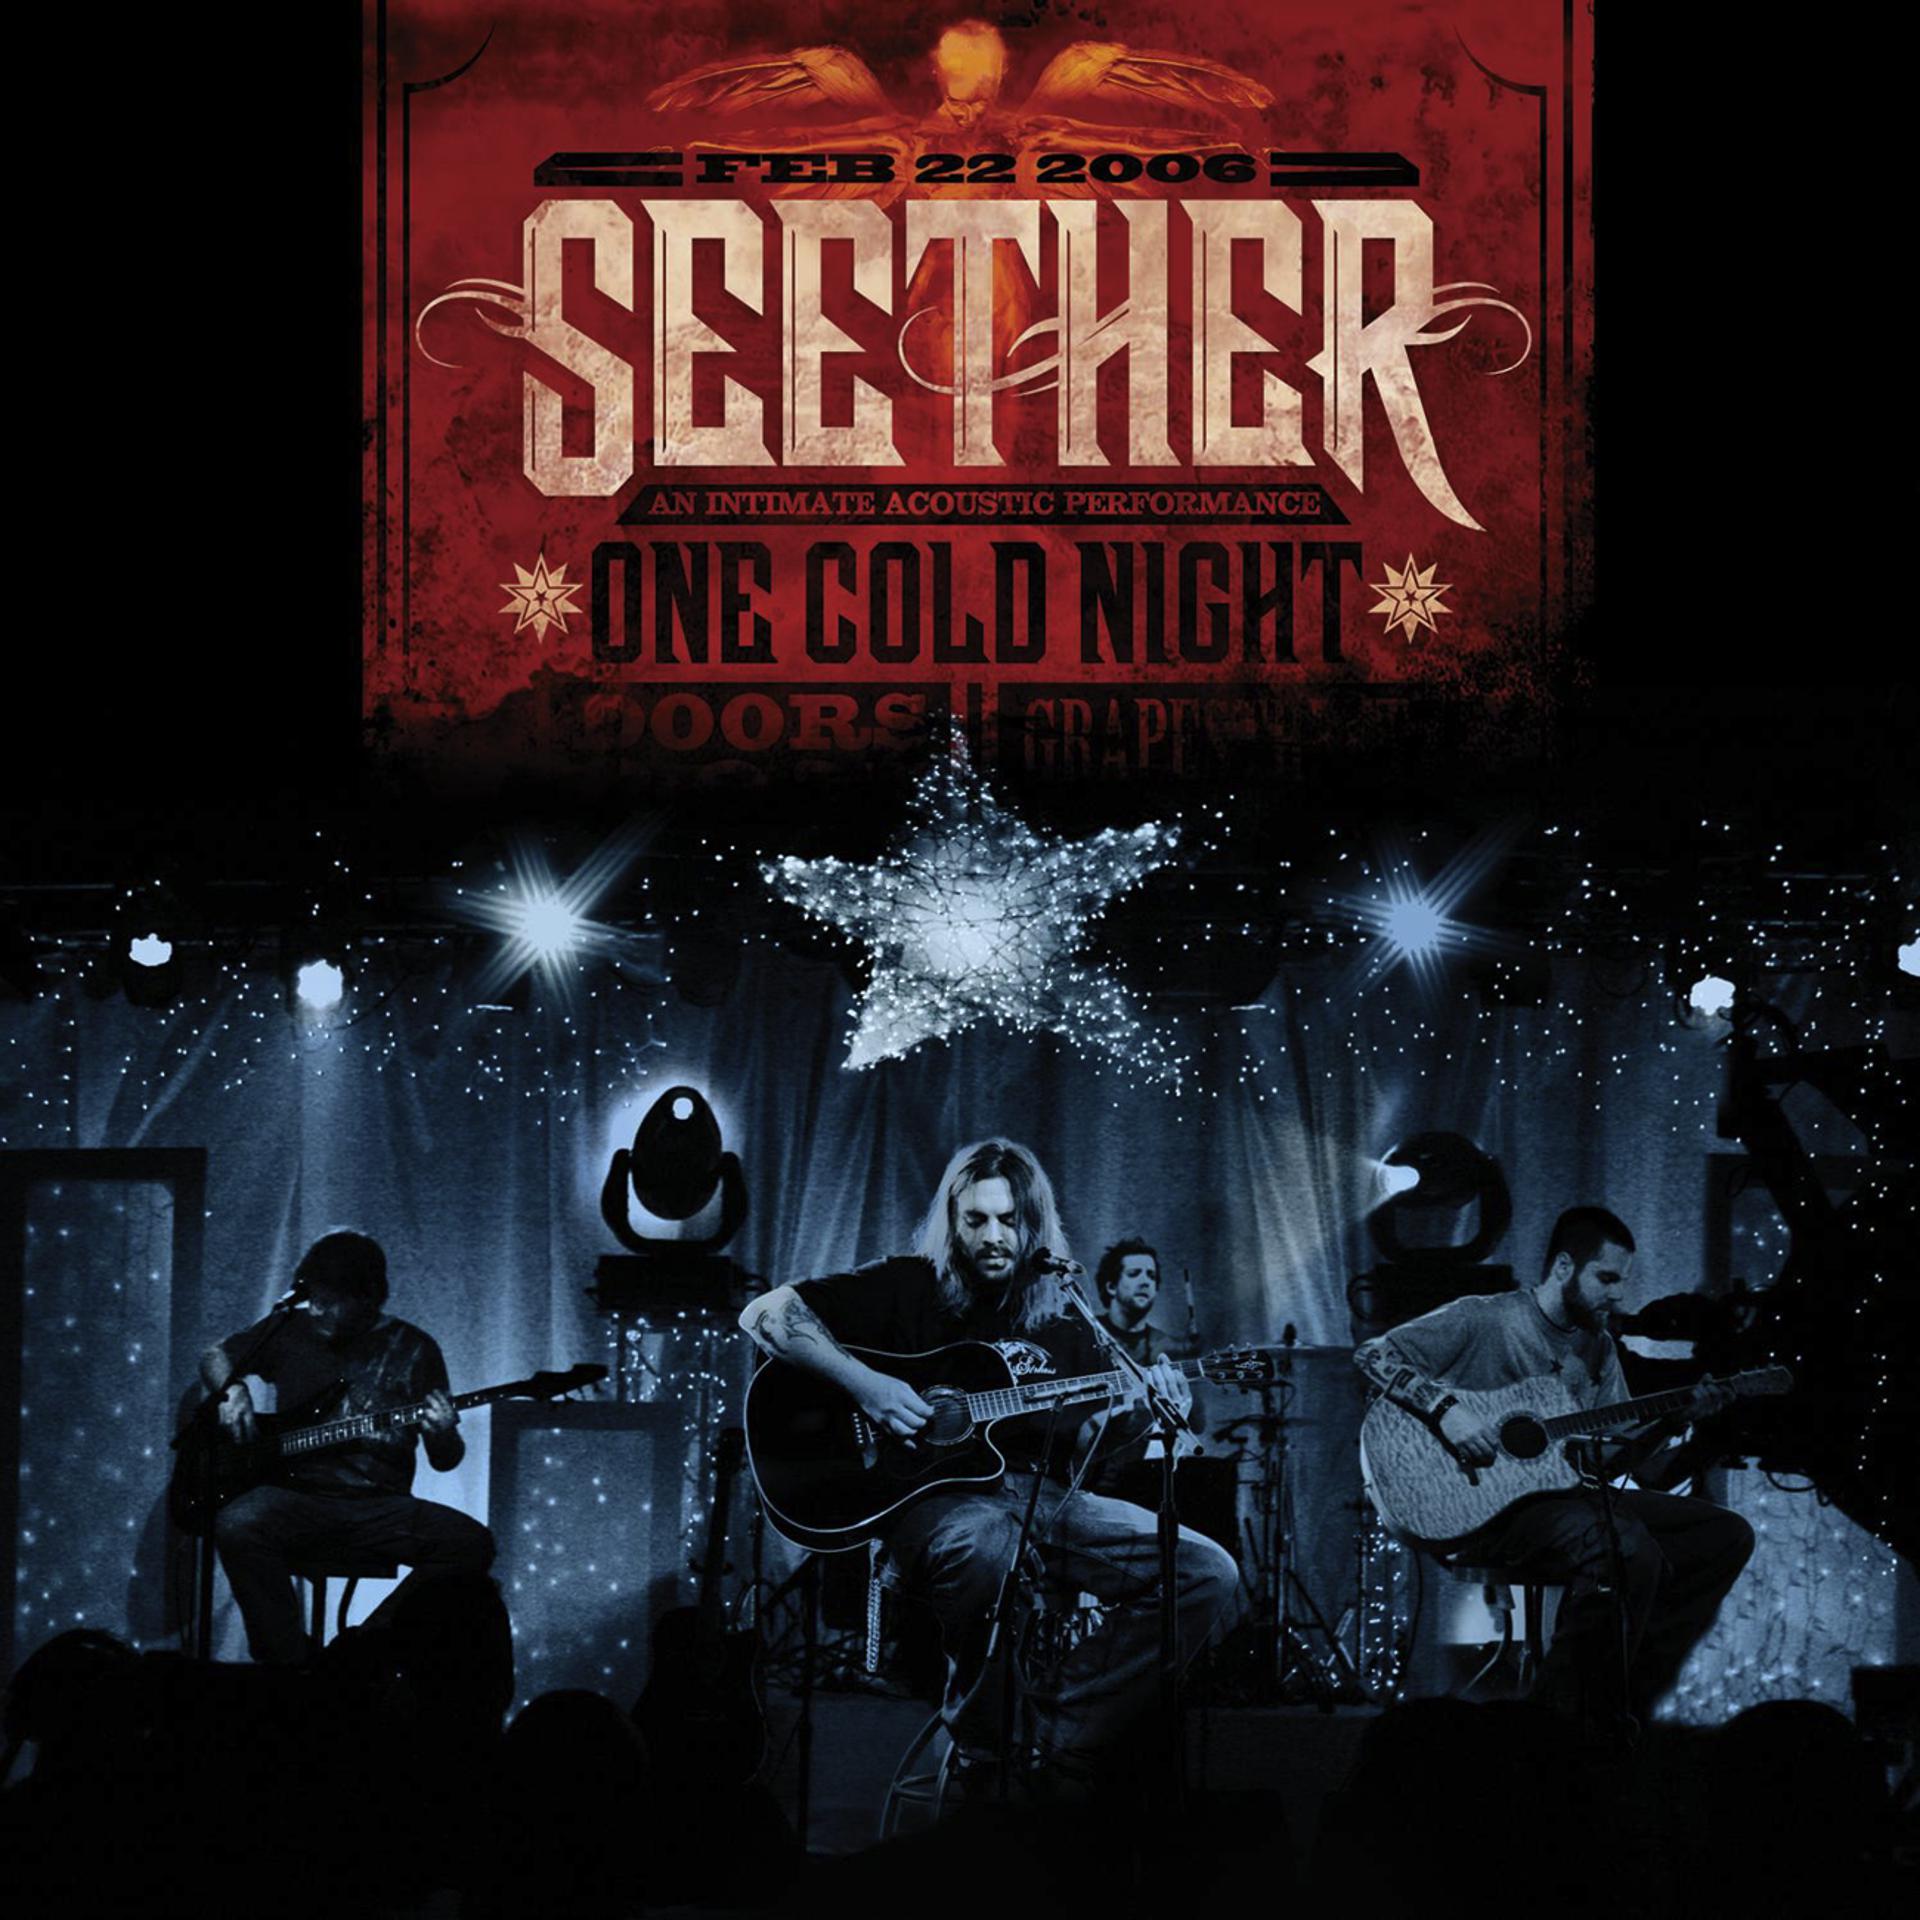 Cold nights 1. Seether 2006 - one Cold Night. Seether альбомы. Seether обложка. Seether логотип.